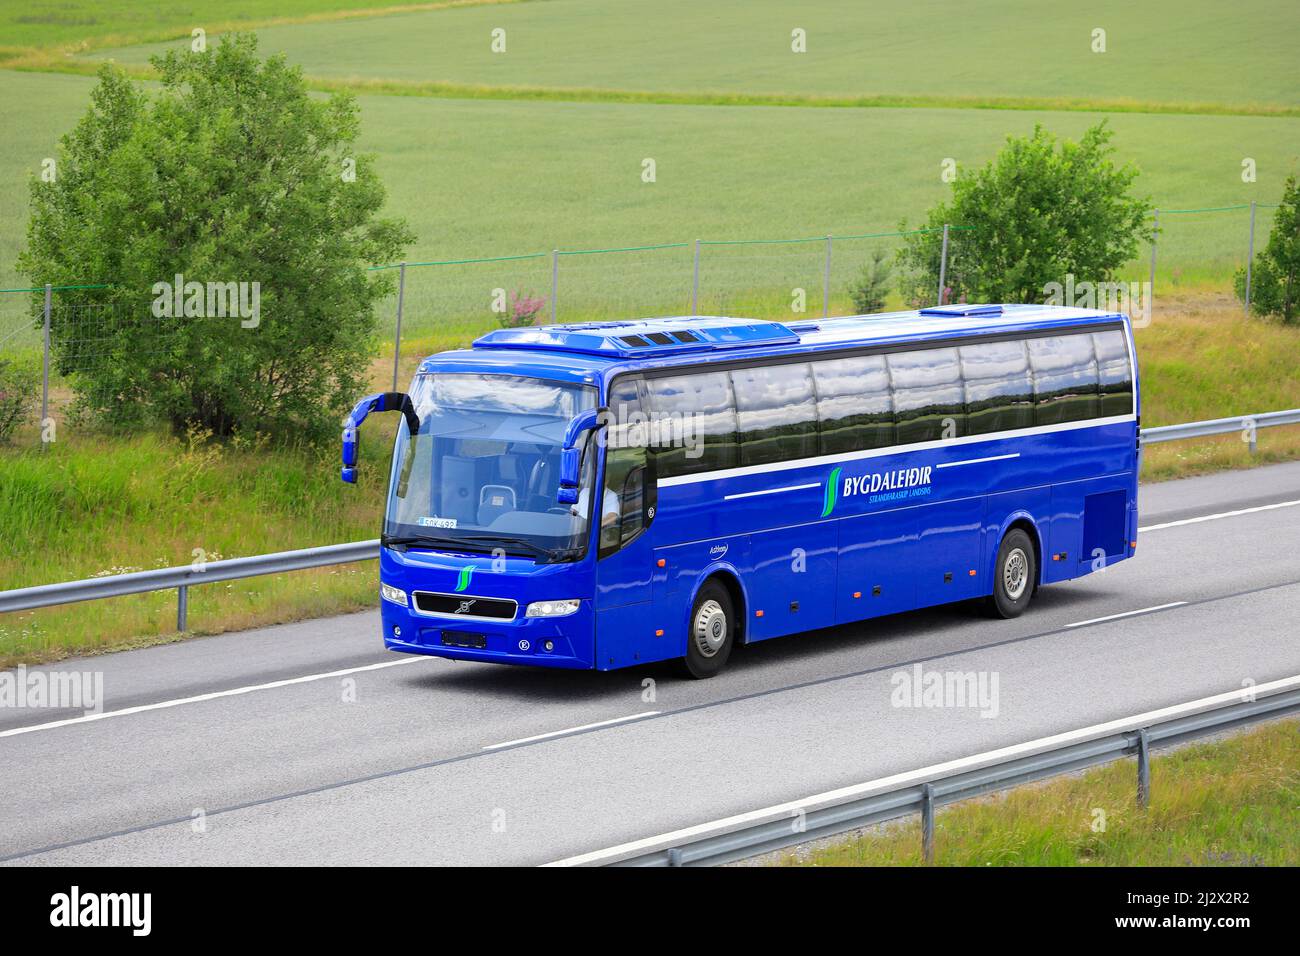 Bright blue Volvo bus Bygdaleidir, Finland plates, on Finnish National Road 1, E18, in South of Finland. Salo, Finland. July 10, 2020. Stock Photo